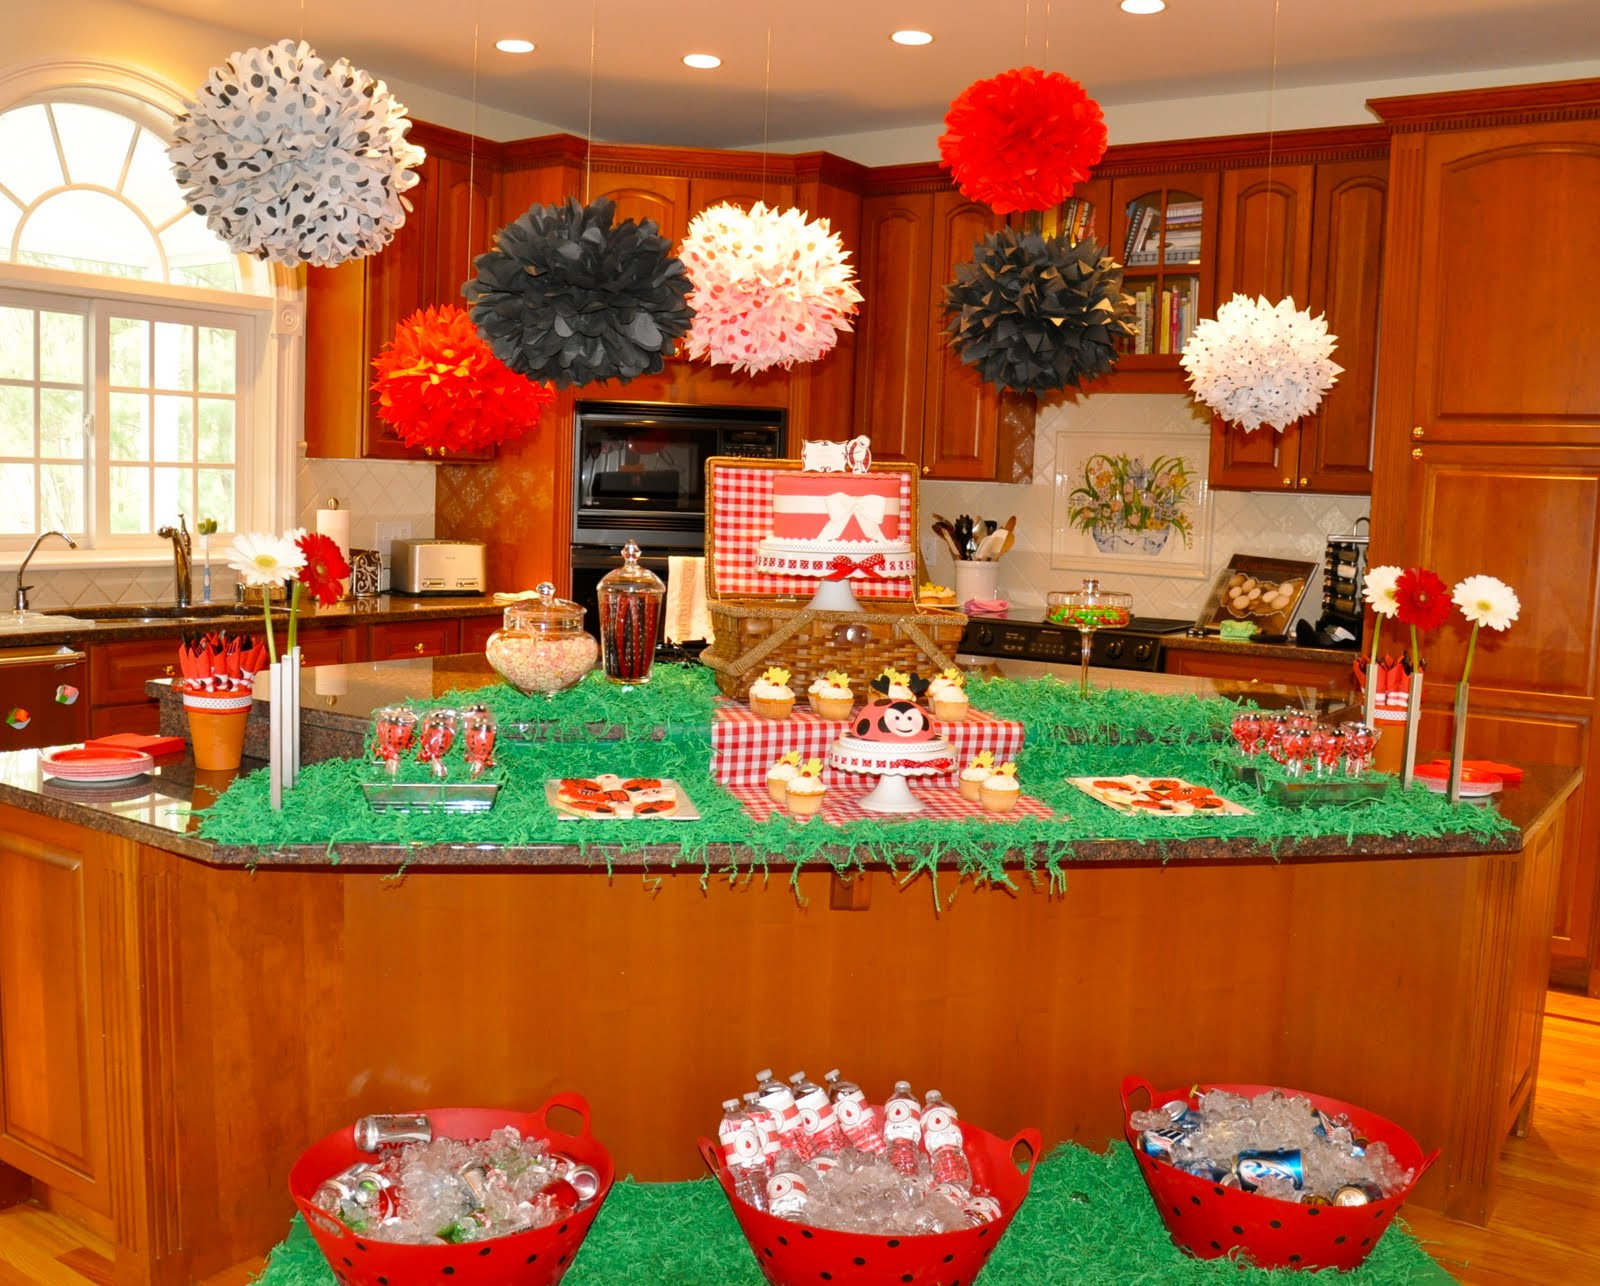 Indoor Birthday Party Ideas
 Party of the Week Ladybug Picnic Birthday Bash